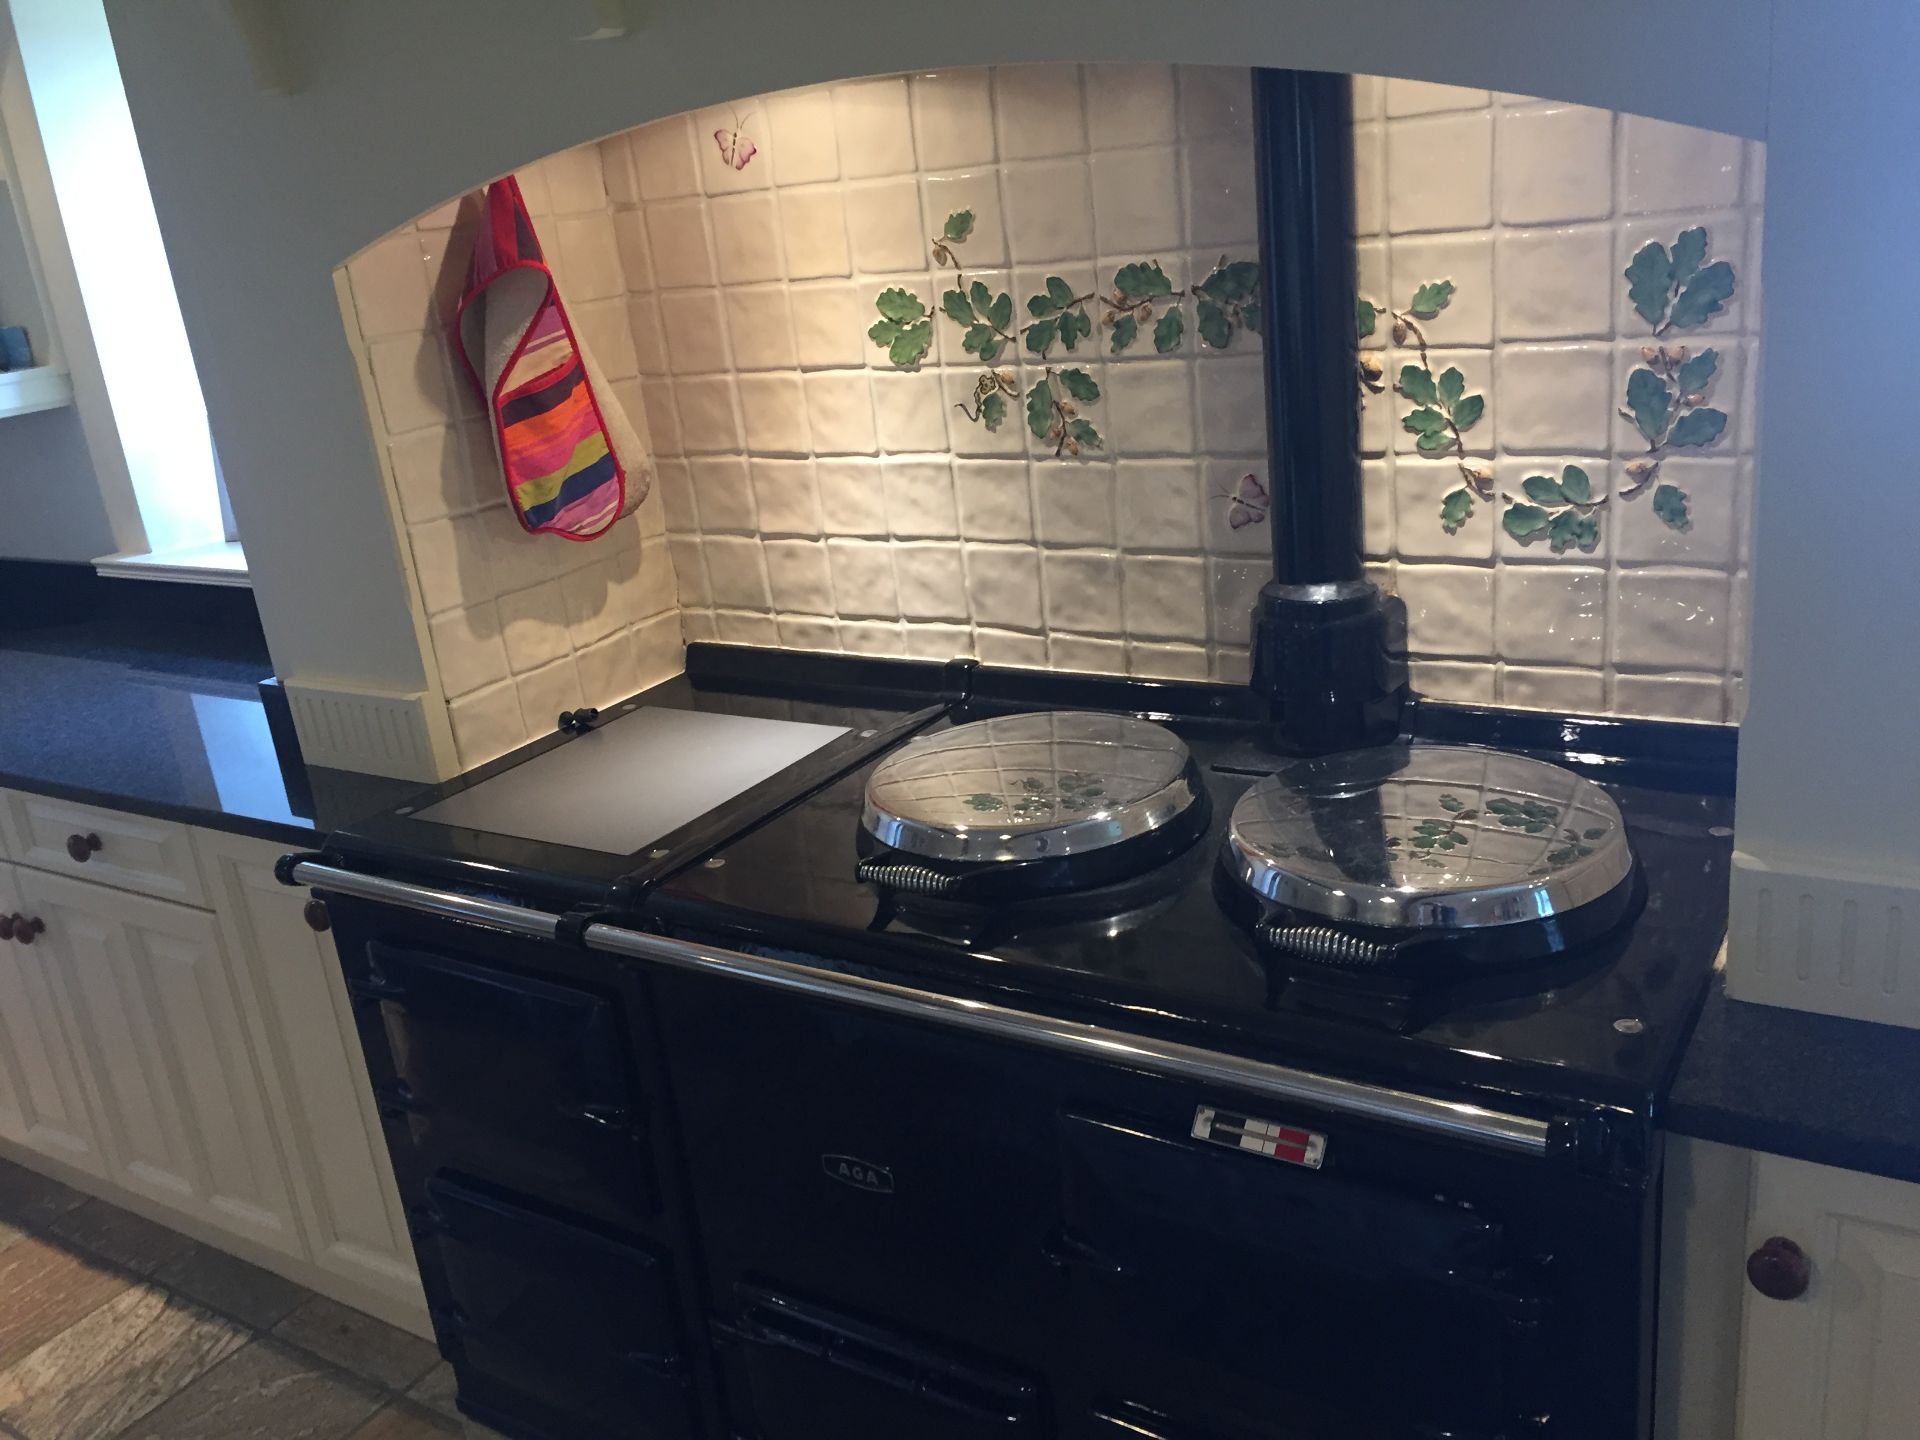 1 x Aga 4-Oven, 3-Plate Dual-Fuel Range Cooker - Cast Iron With Navy Enamel Finish With A Black - Image 3 of 21